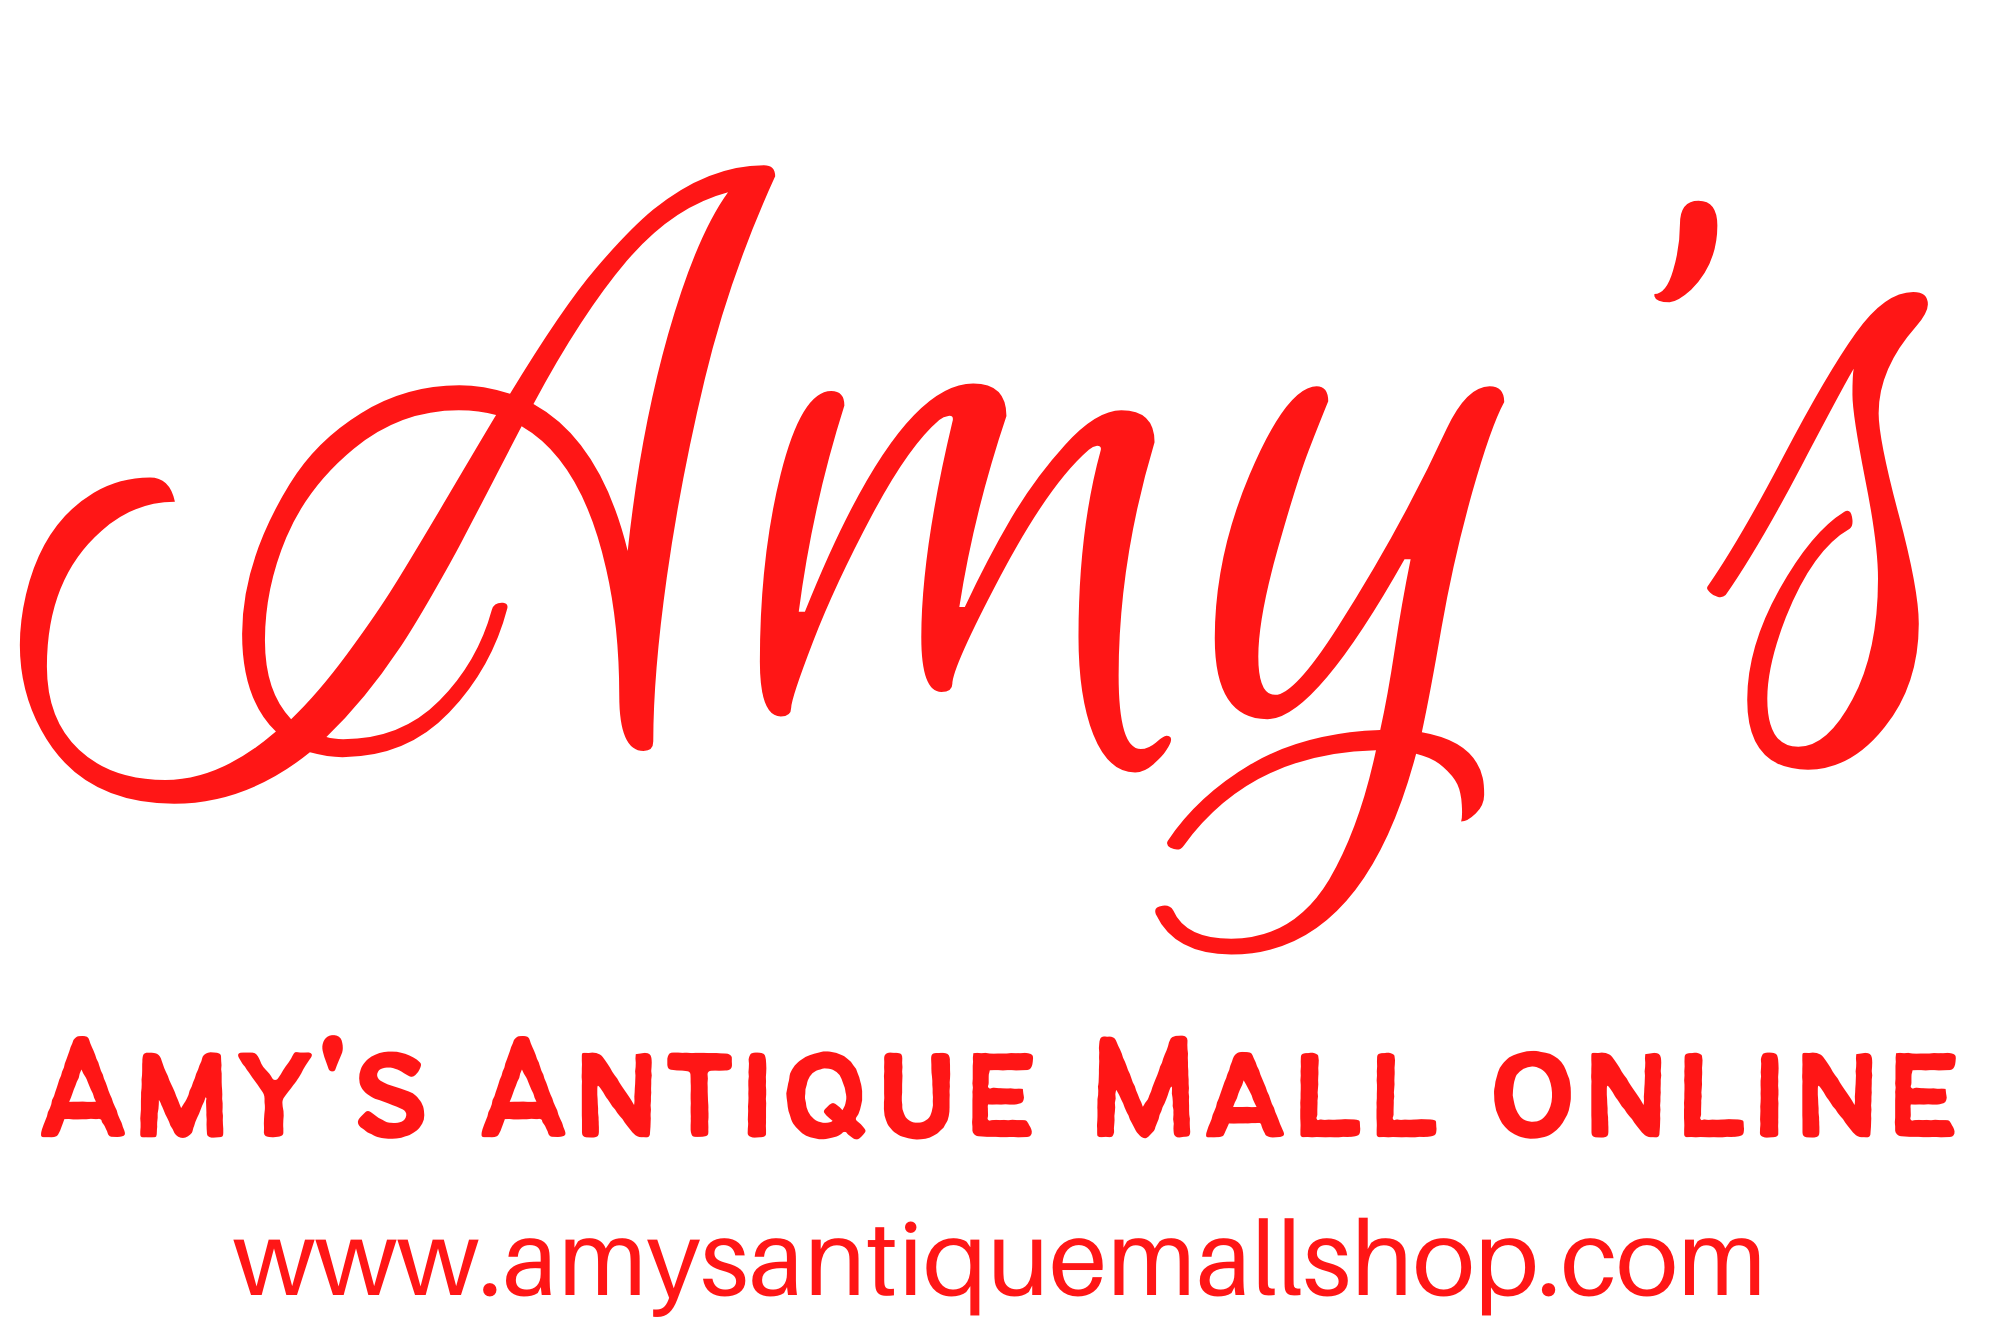 Amy's Antique Mall